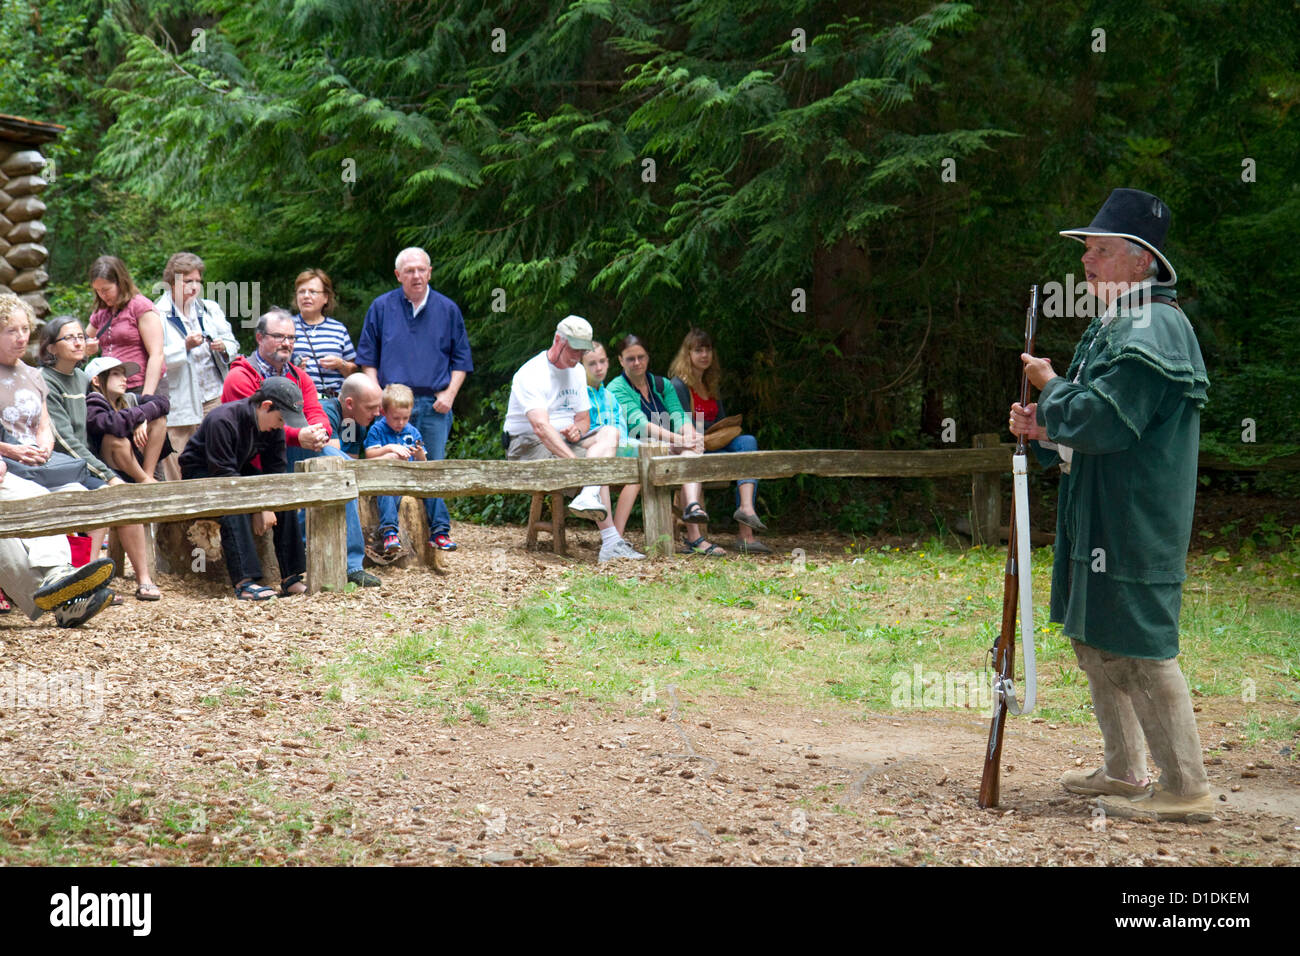 Musket demonstration at Fort Clatsop, Lewis and Clark National Historical Park near the mouth of the Columbia River, Oregon, USA Stock Photo